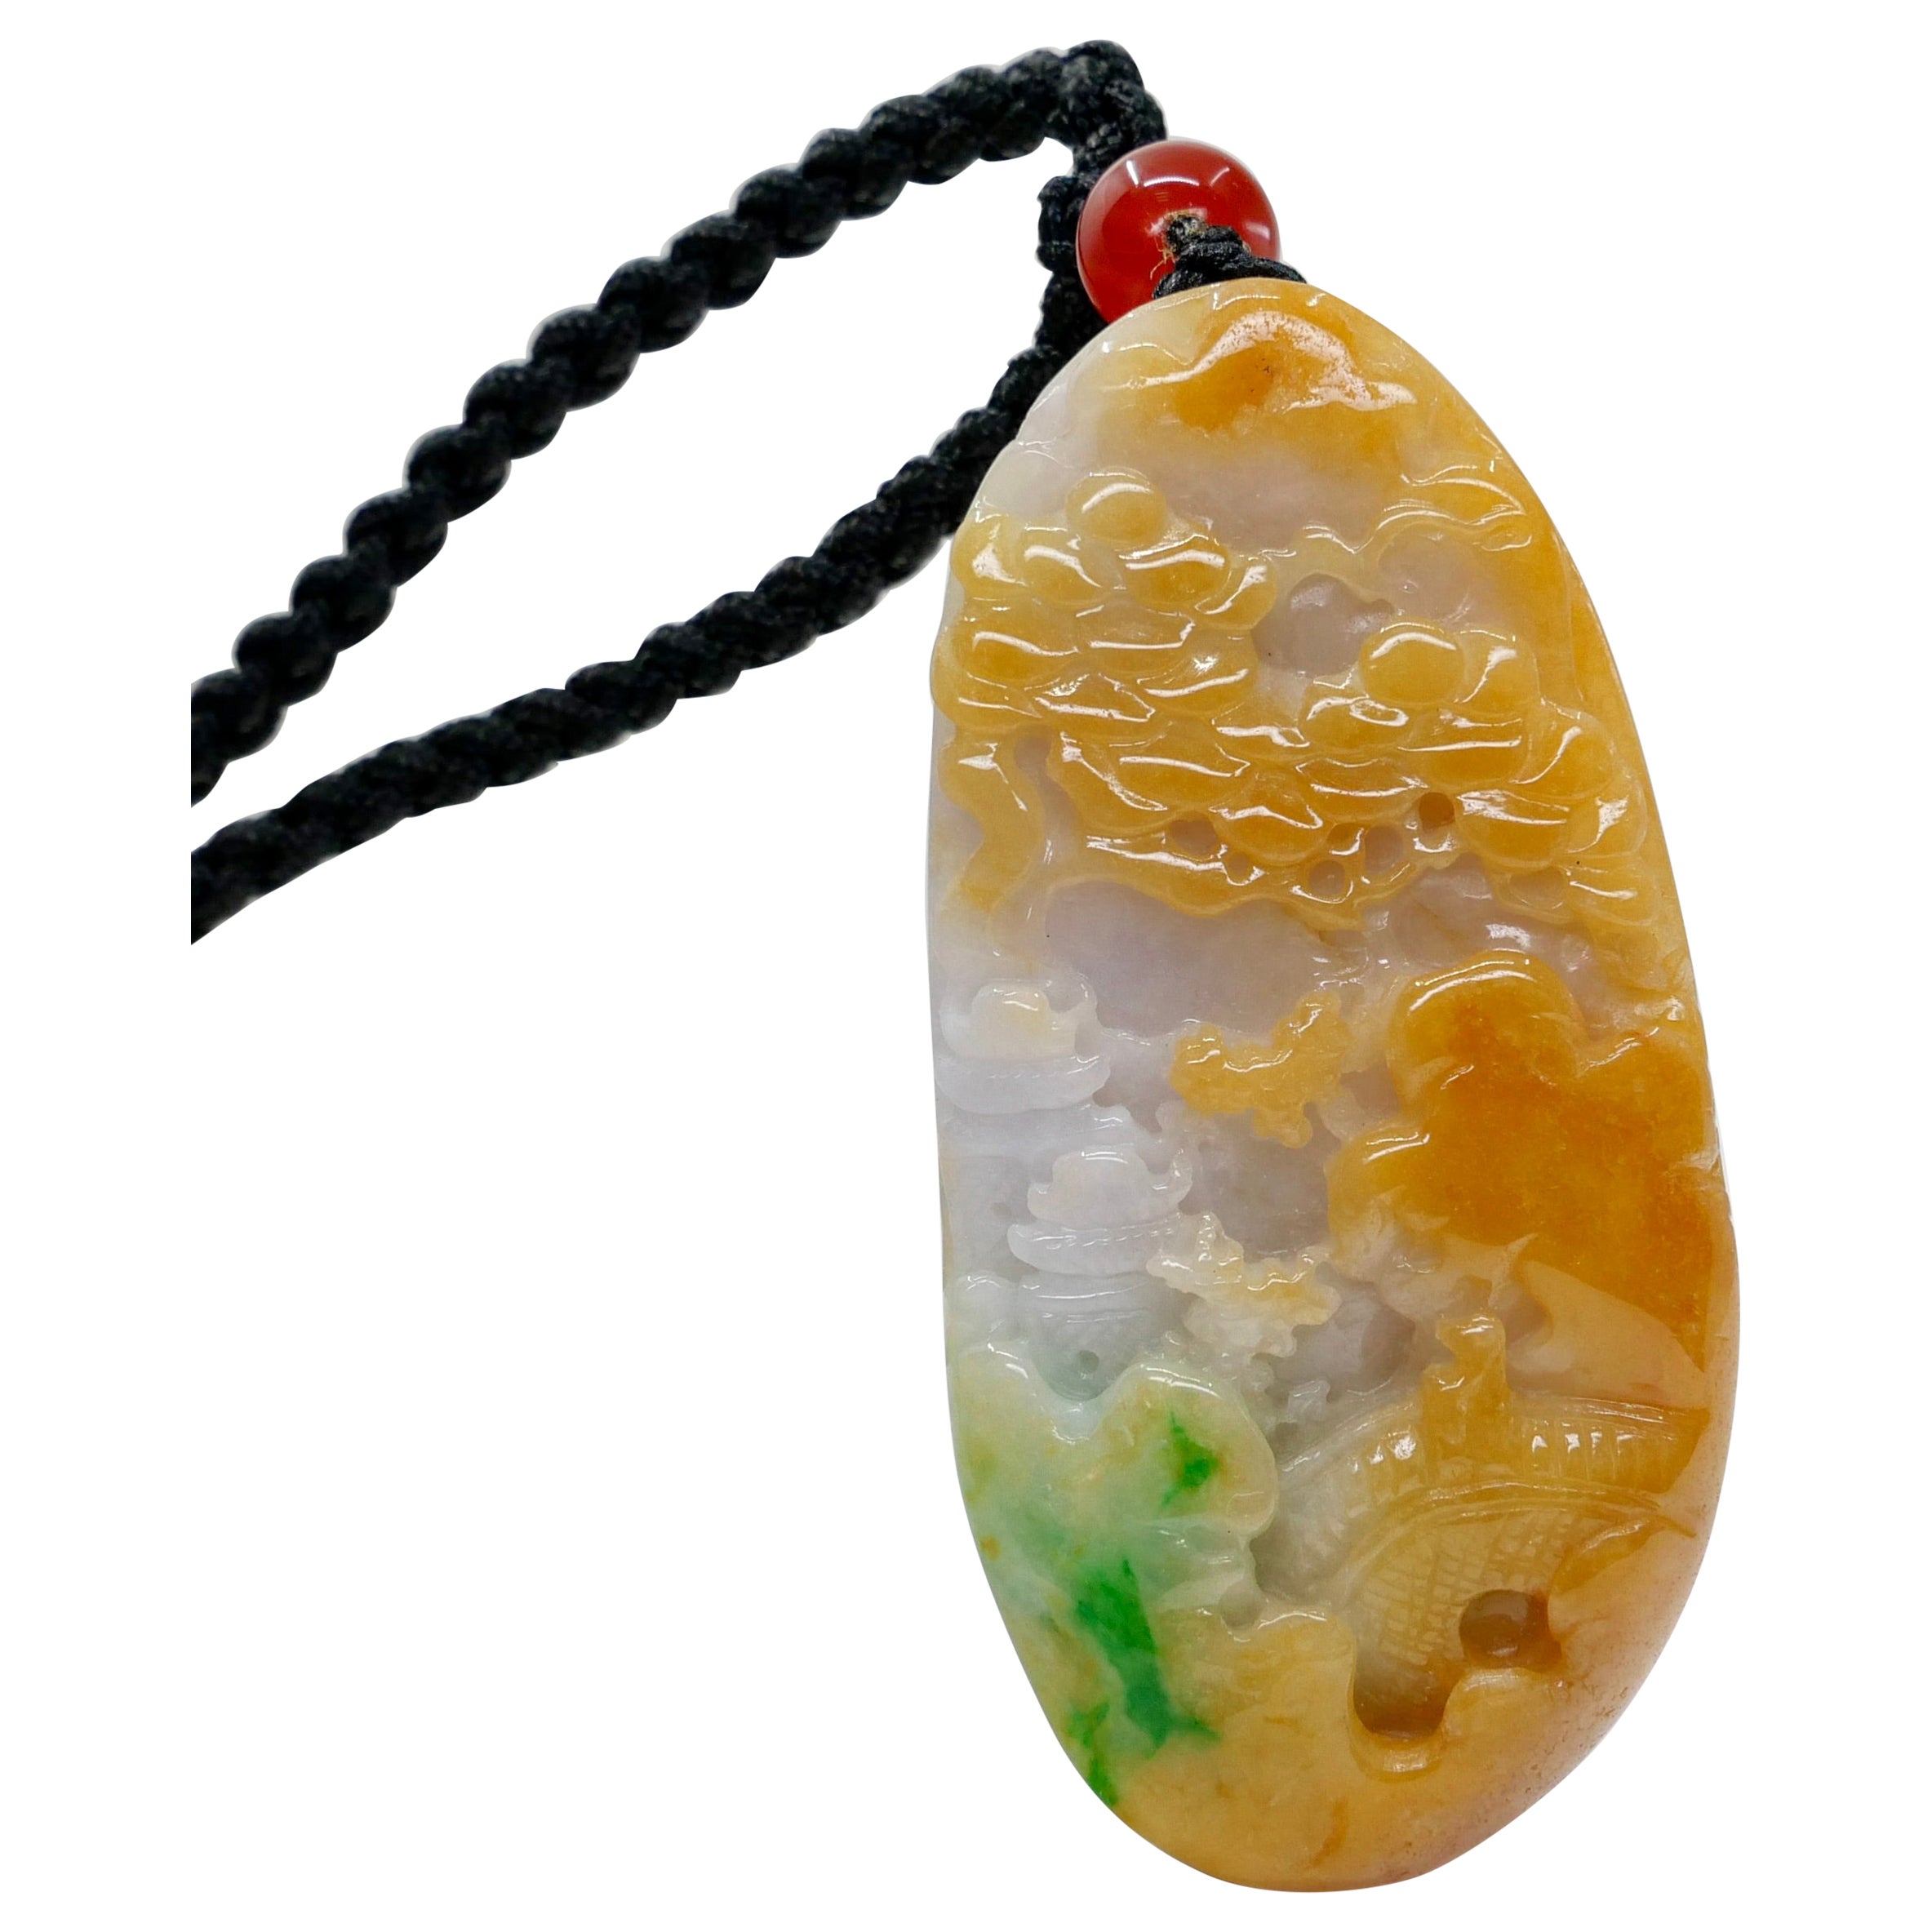 Certified Natural Multi Color Jade & Agate Pendant Necklace, Exquisite Carving For Sale